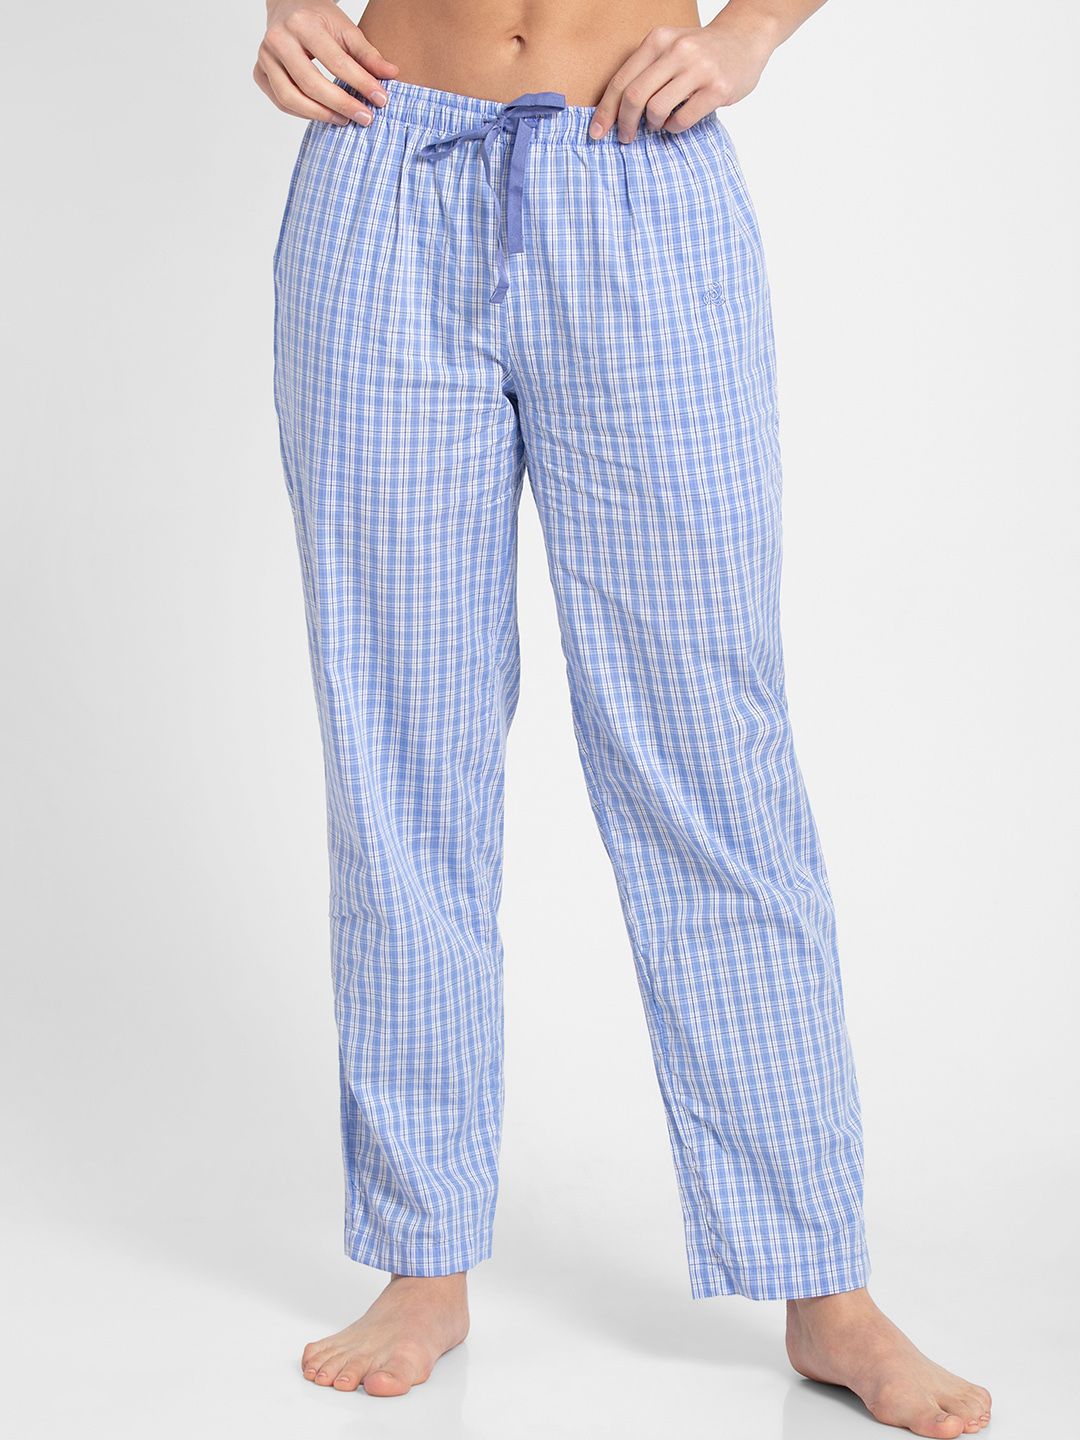 Jockey Relax Women Assorted Checked Lounge Pants Price in India